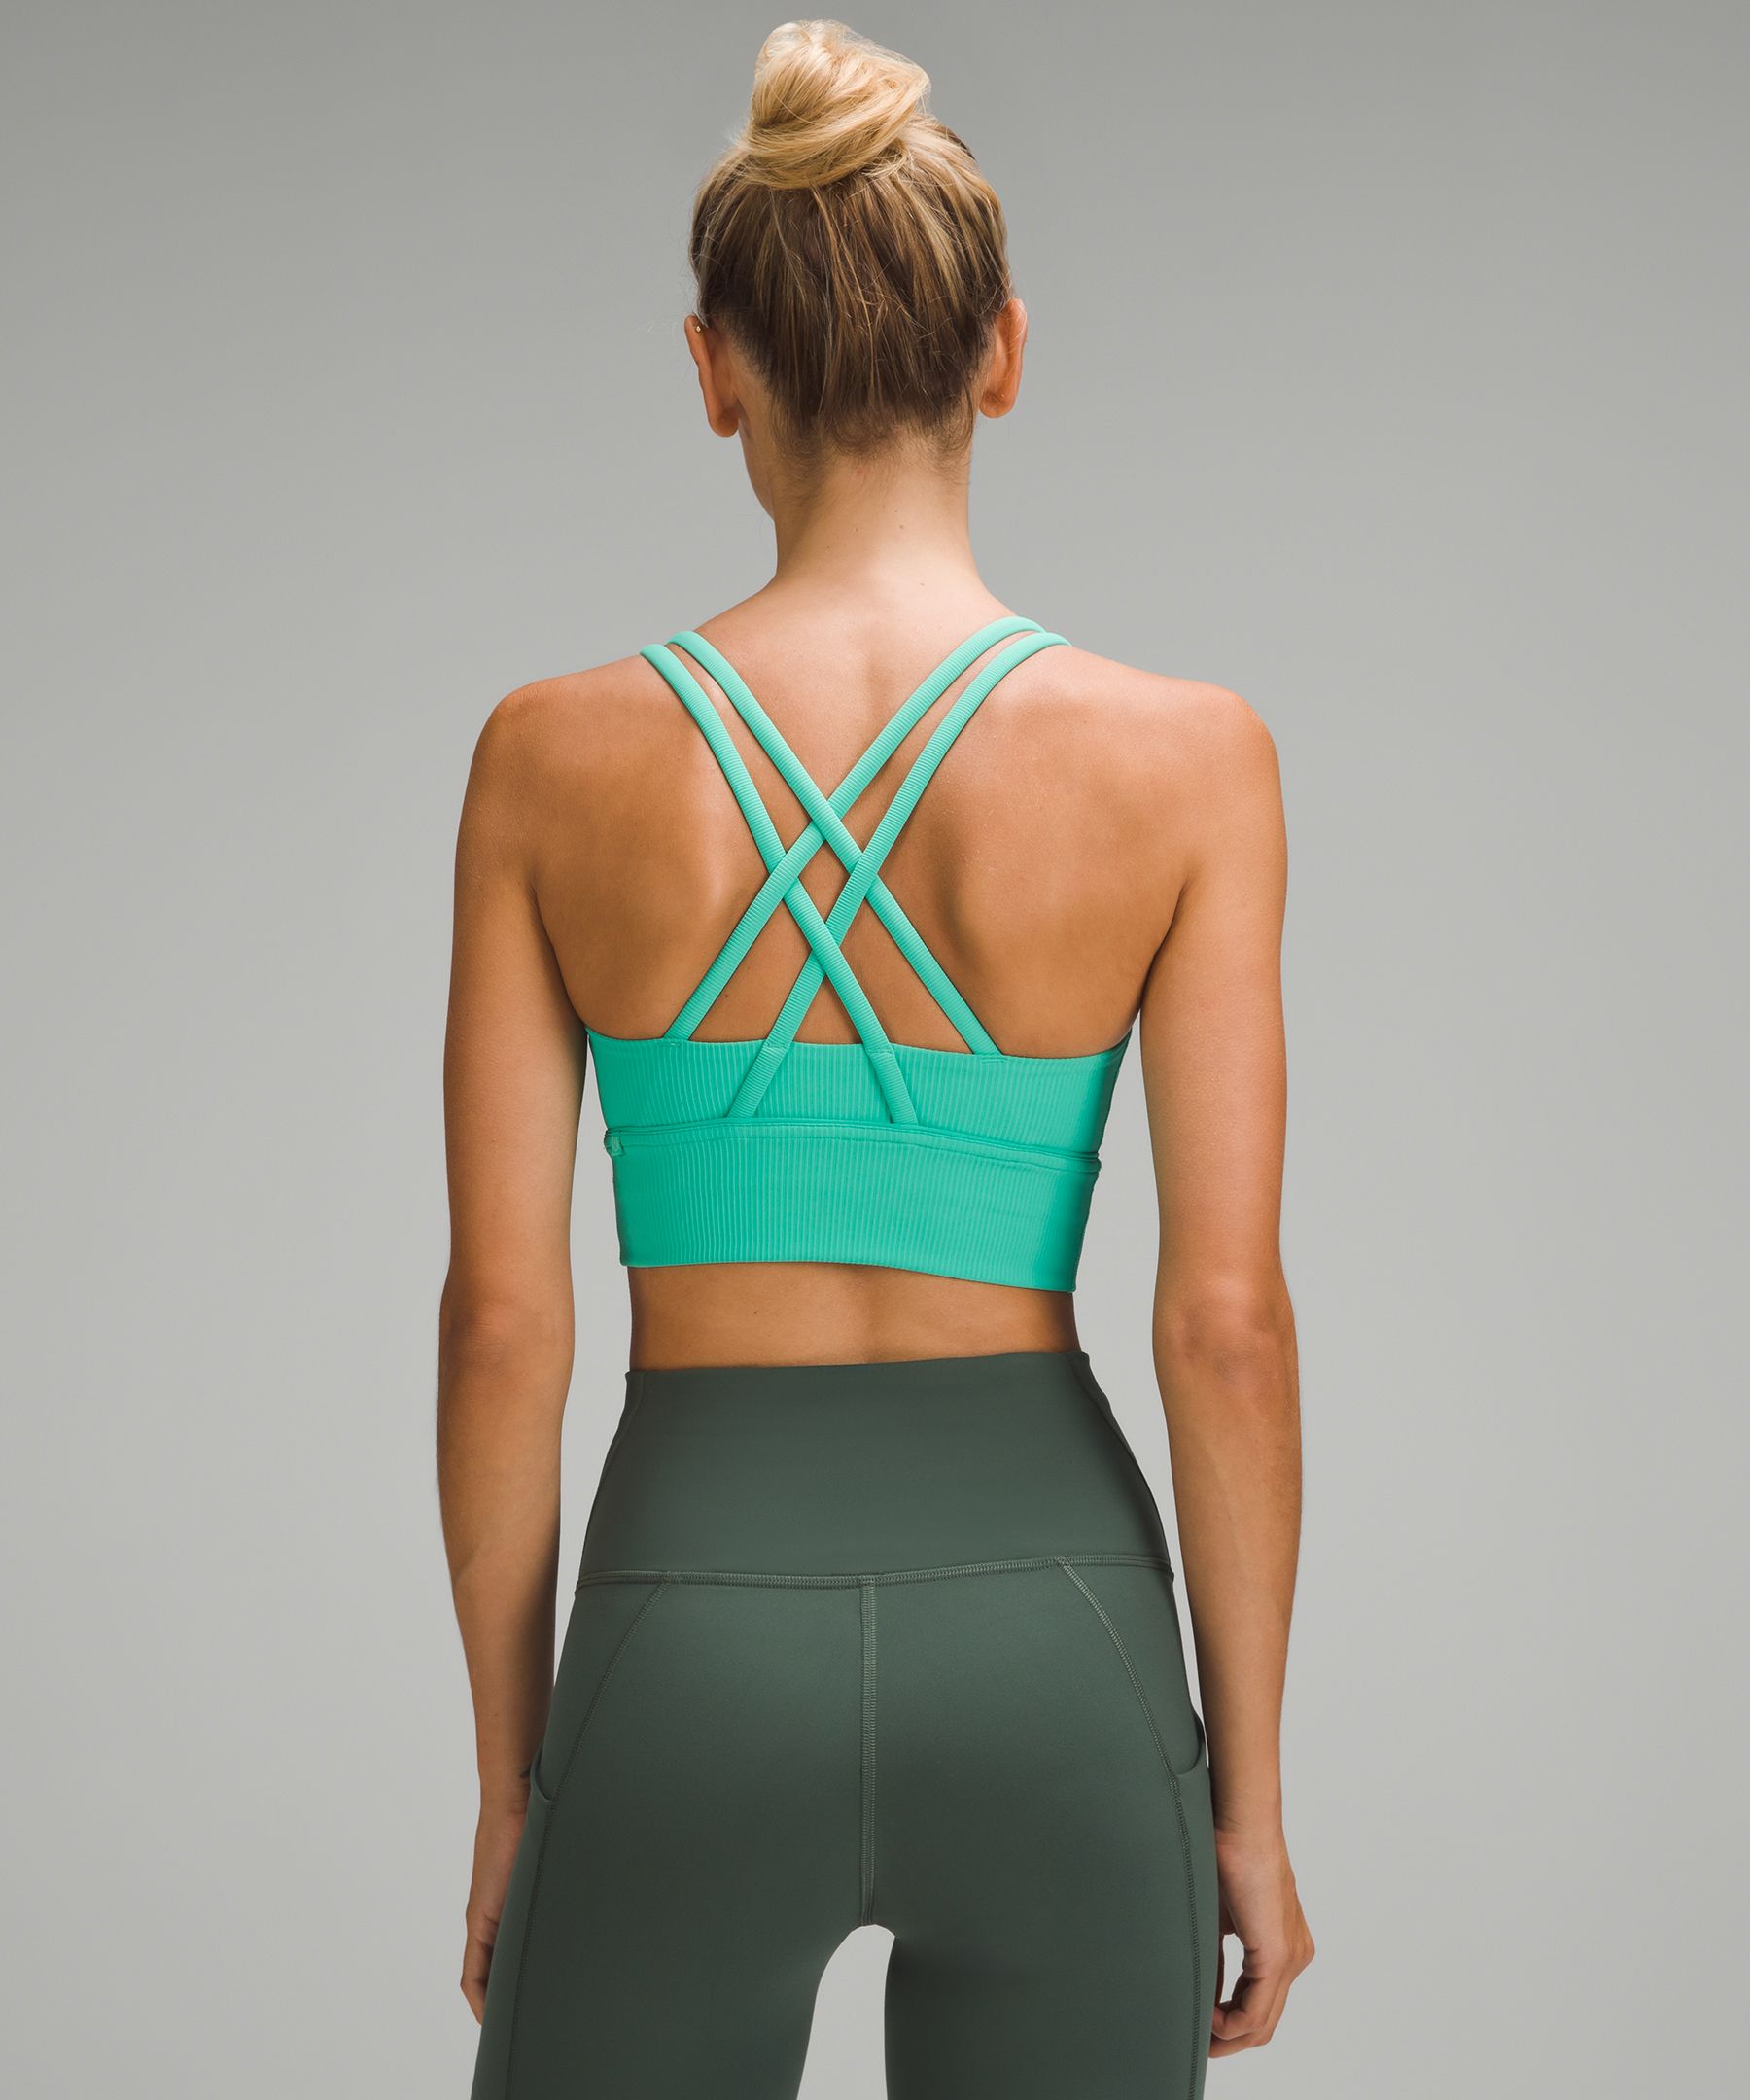 Lululemon Like New Women's In Alignment Sports Bra 34D Size undefined - $38  - From Autumn